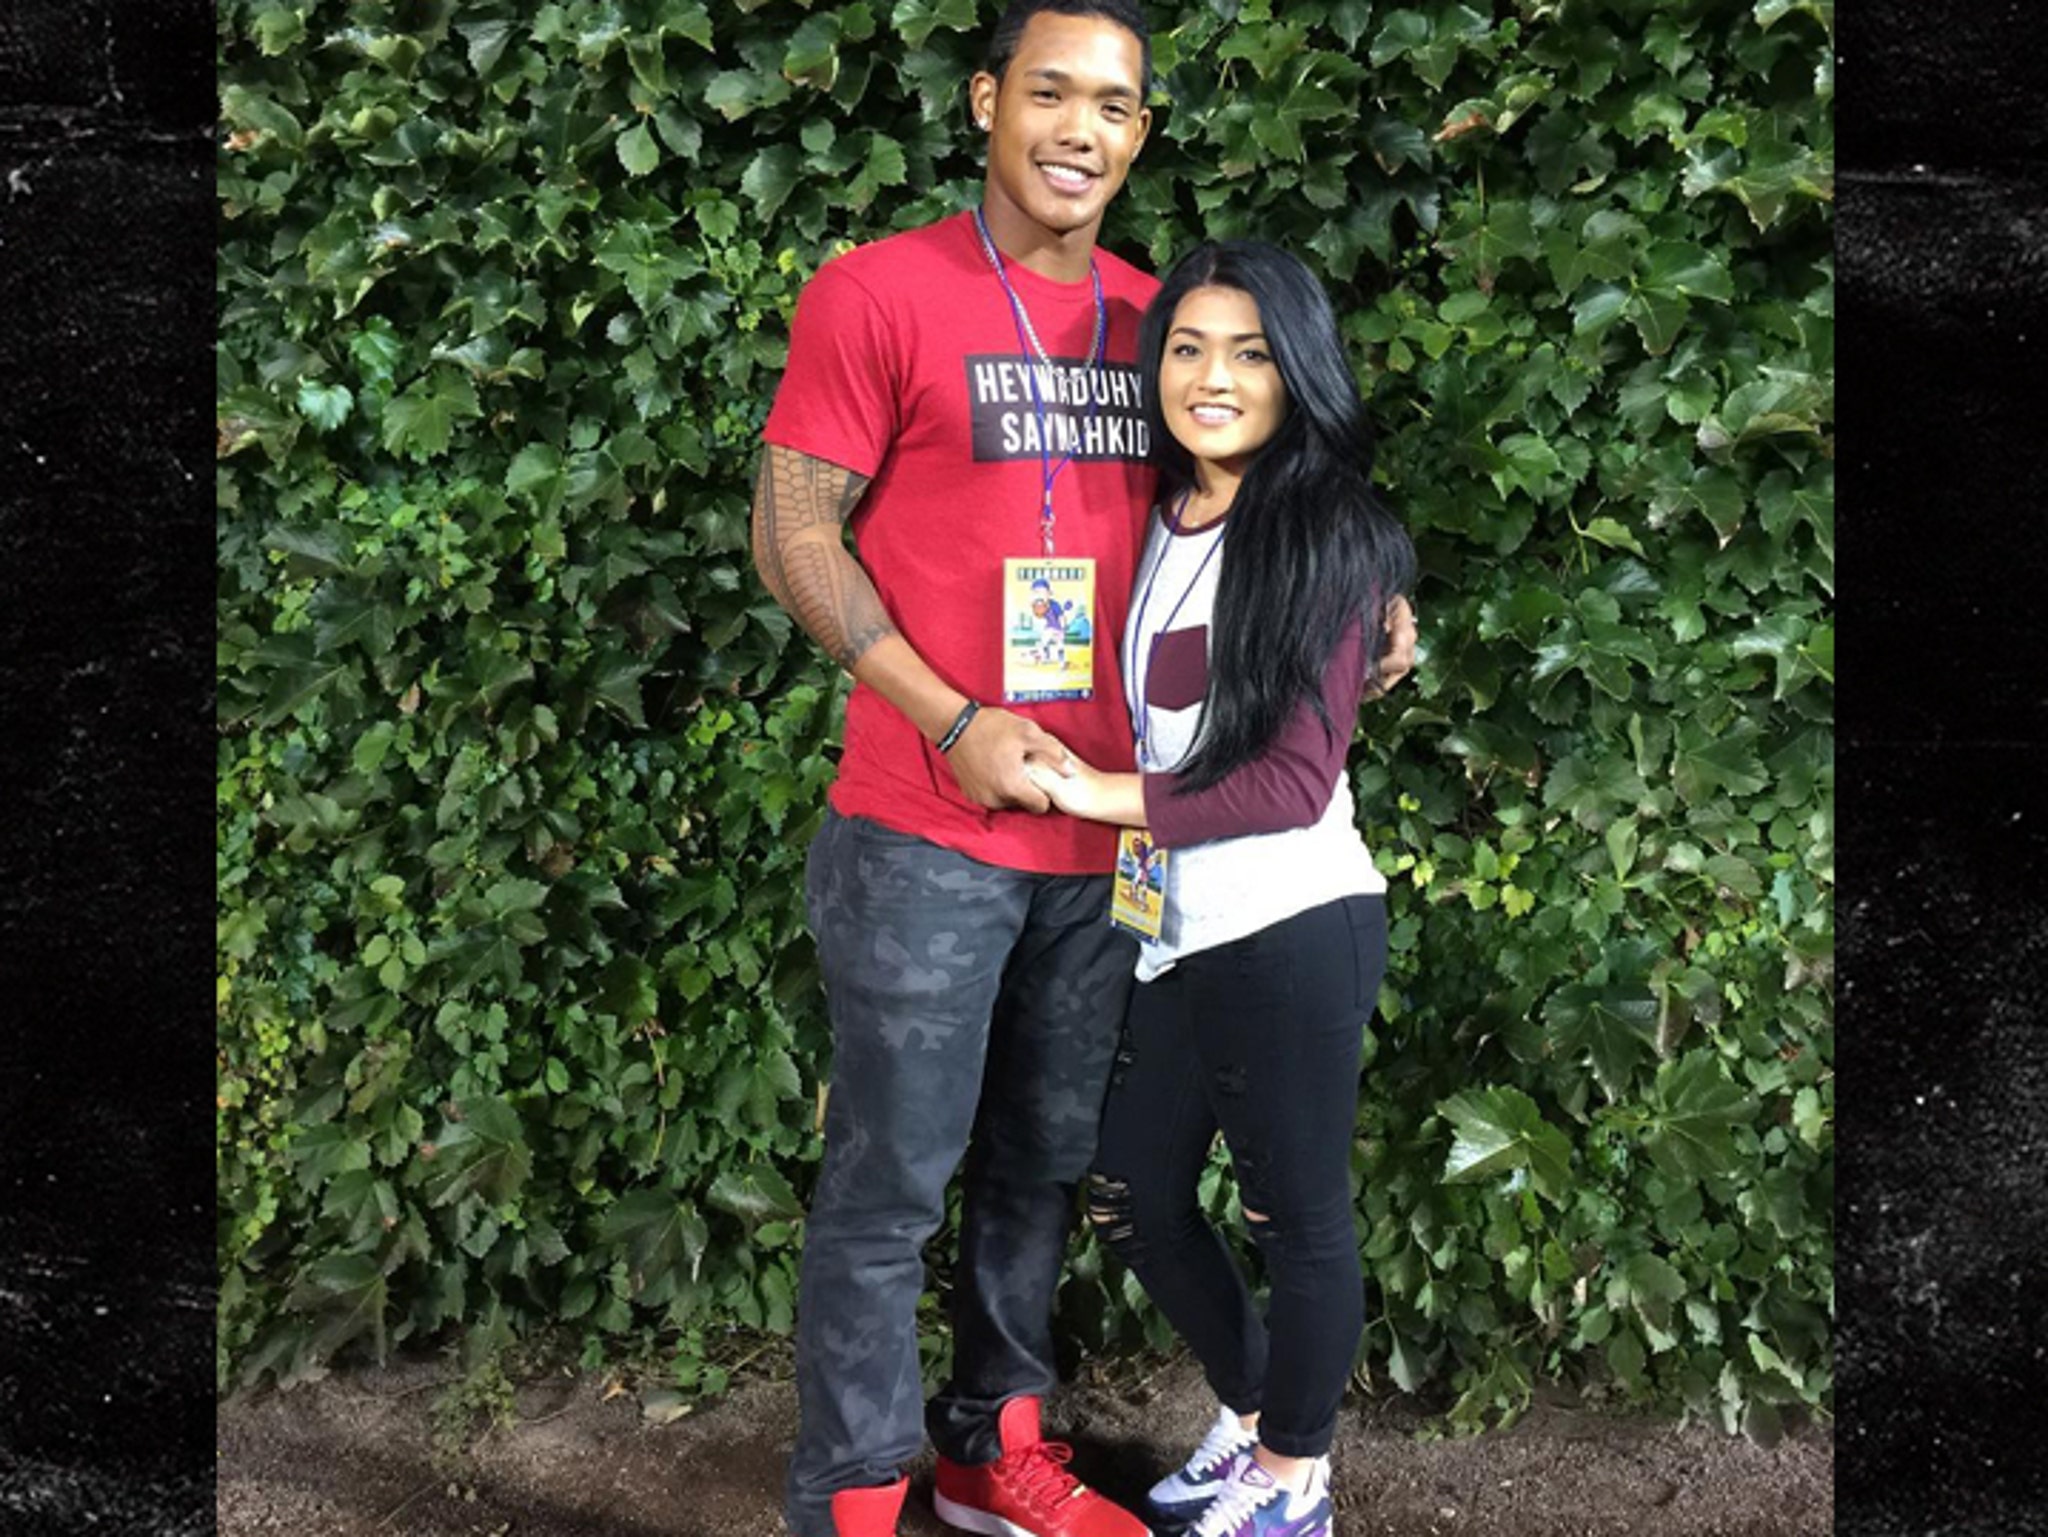 Addison Russell's Wife Filing For Divorce, Won't Speak To MLB